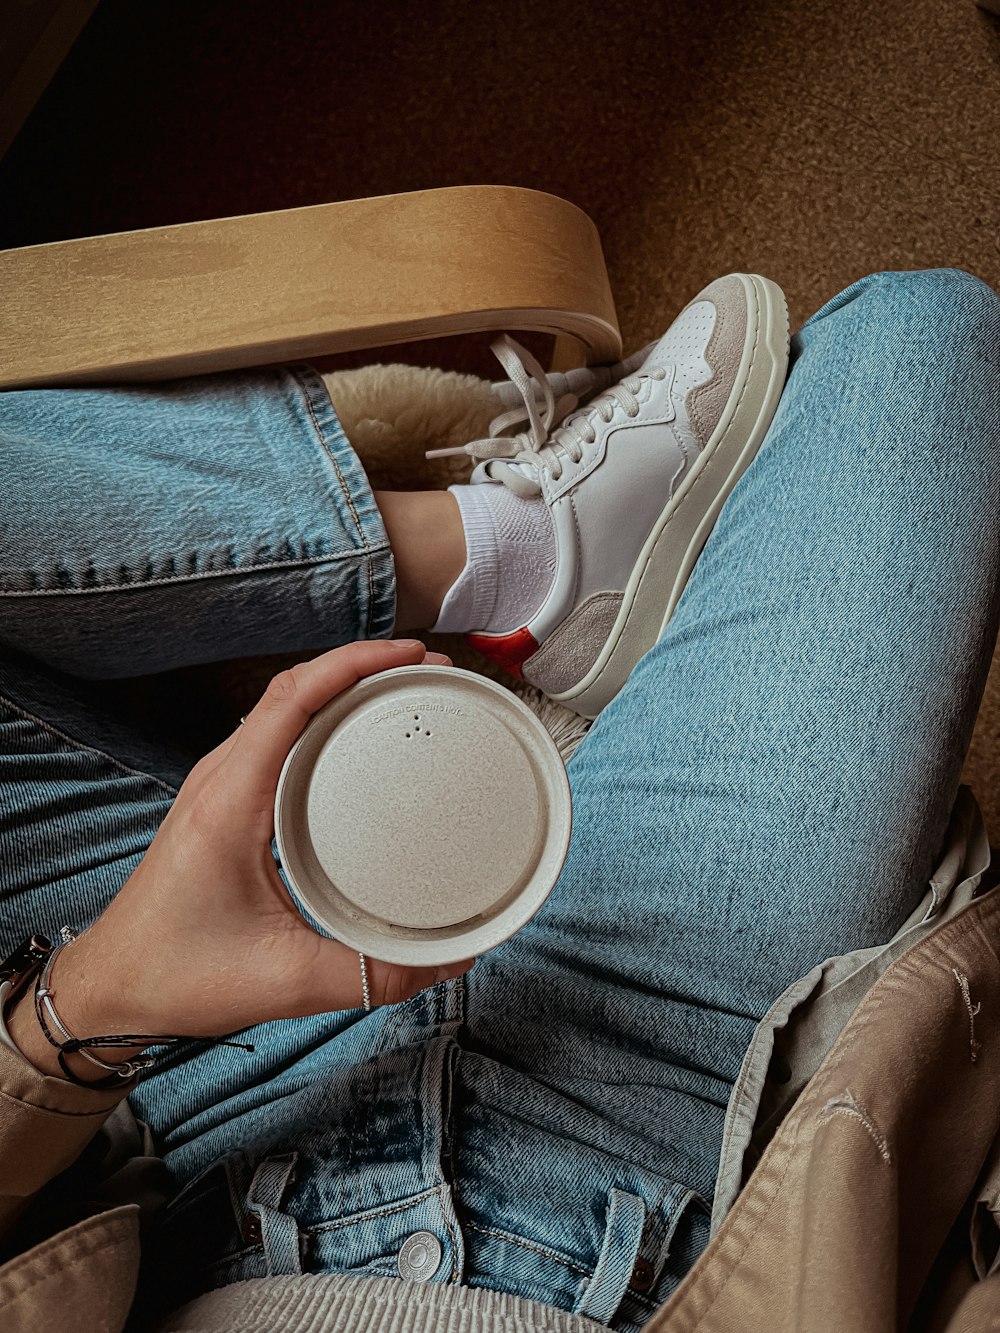 a person sitting on the floor holding a cup of coffee